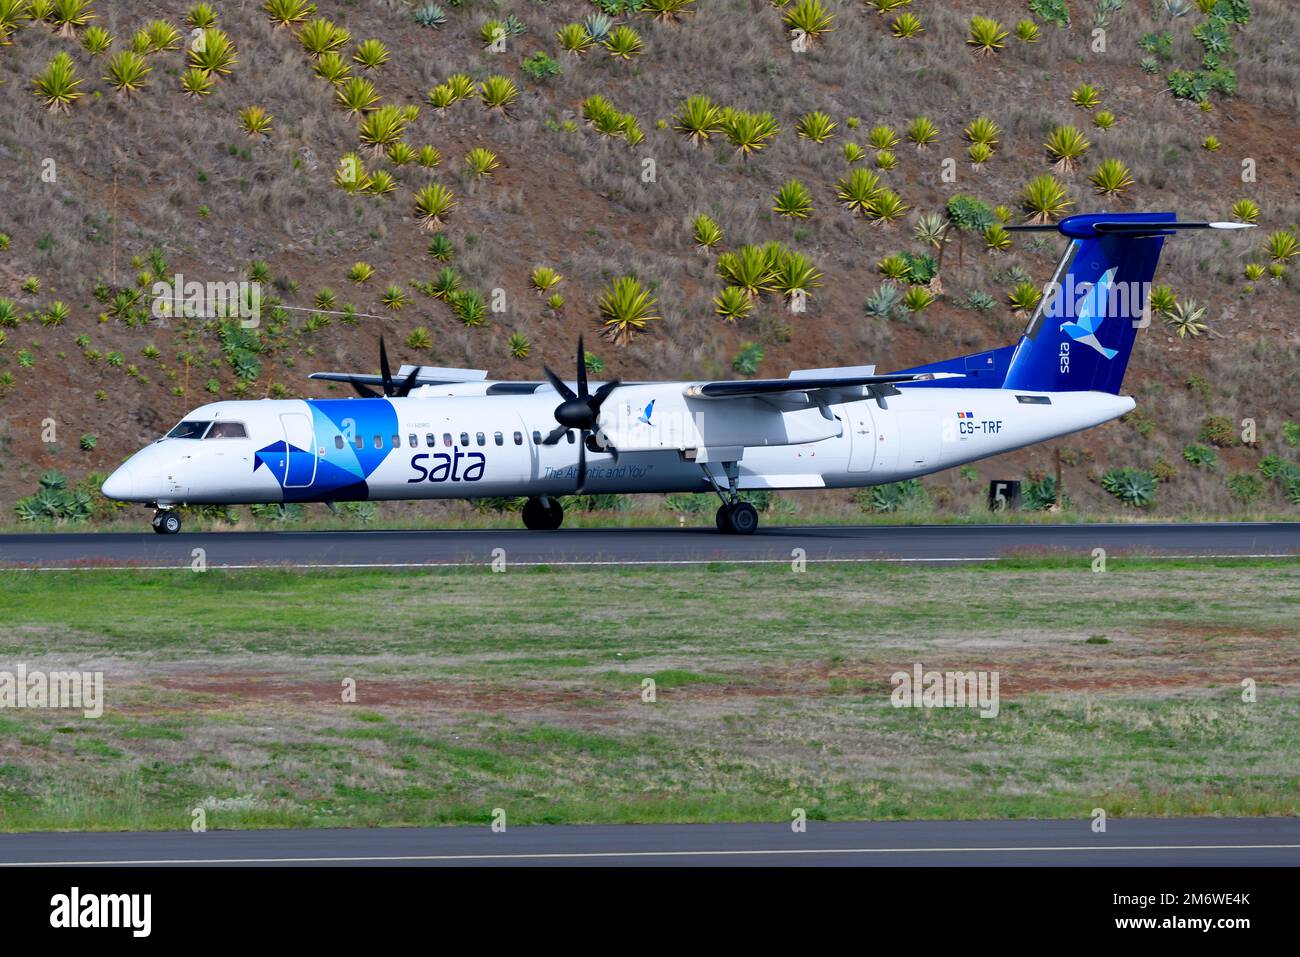 Azores Airlines De Havilland Dash 8 Q400 series aircraft landing. Airplane DHC-8 of Açores Airlines, previously know as SATA Air Acores. Stock Photo